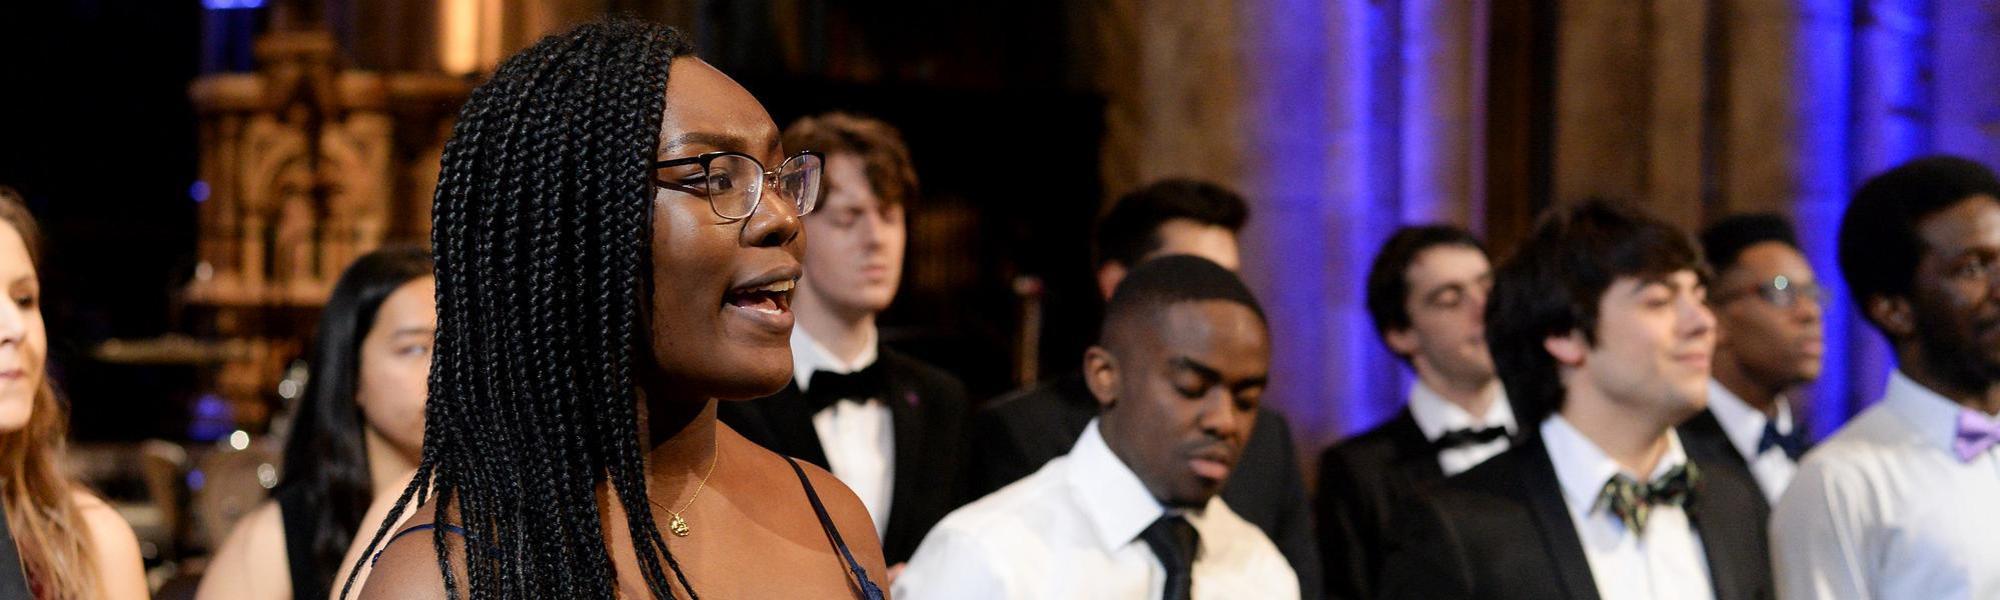 Students singing in Gospel Choir at Durham Cathedral